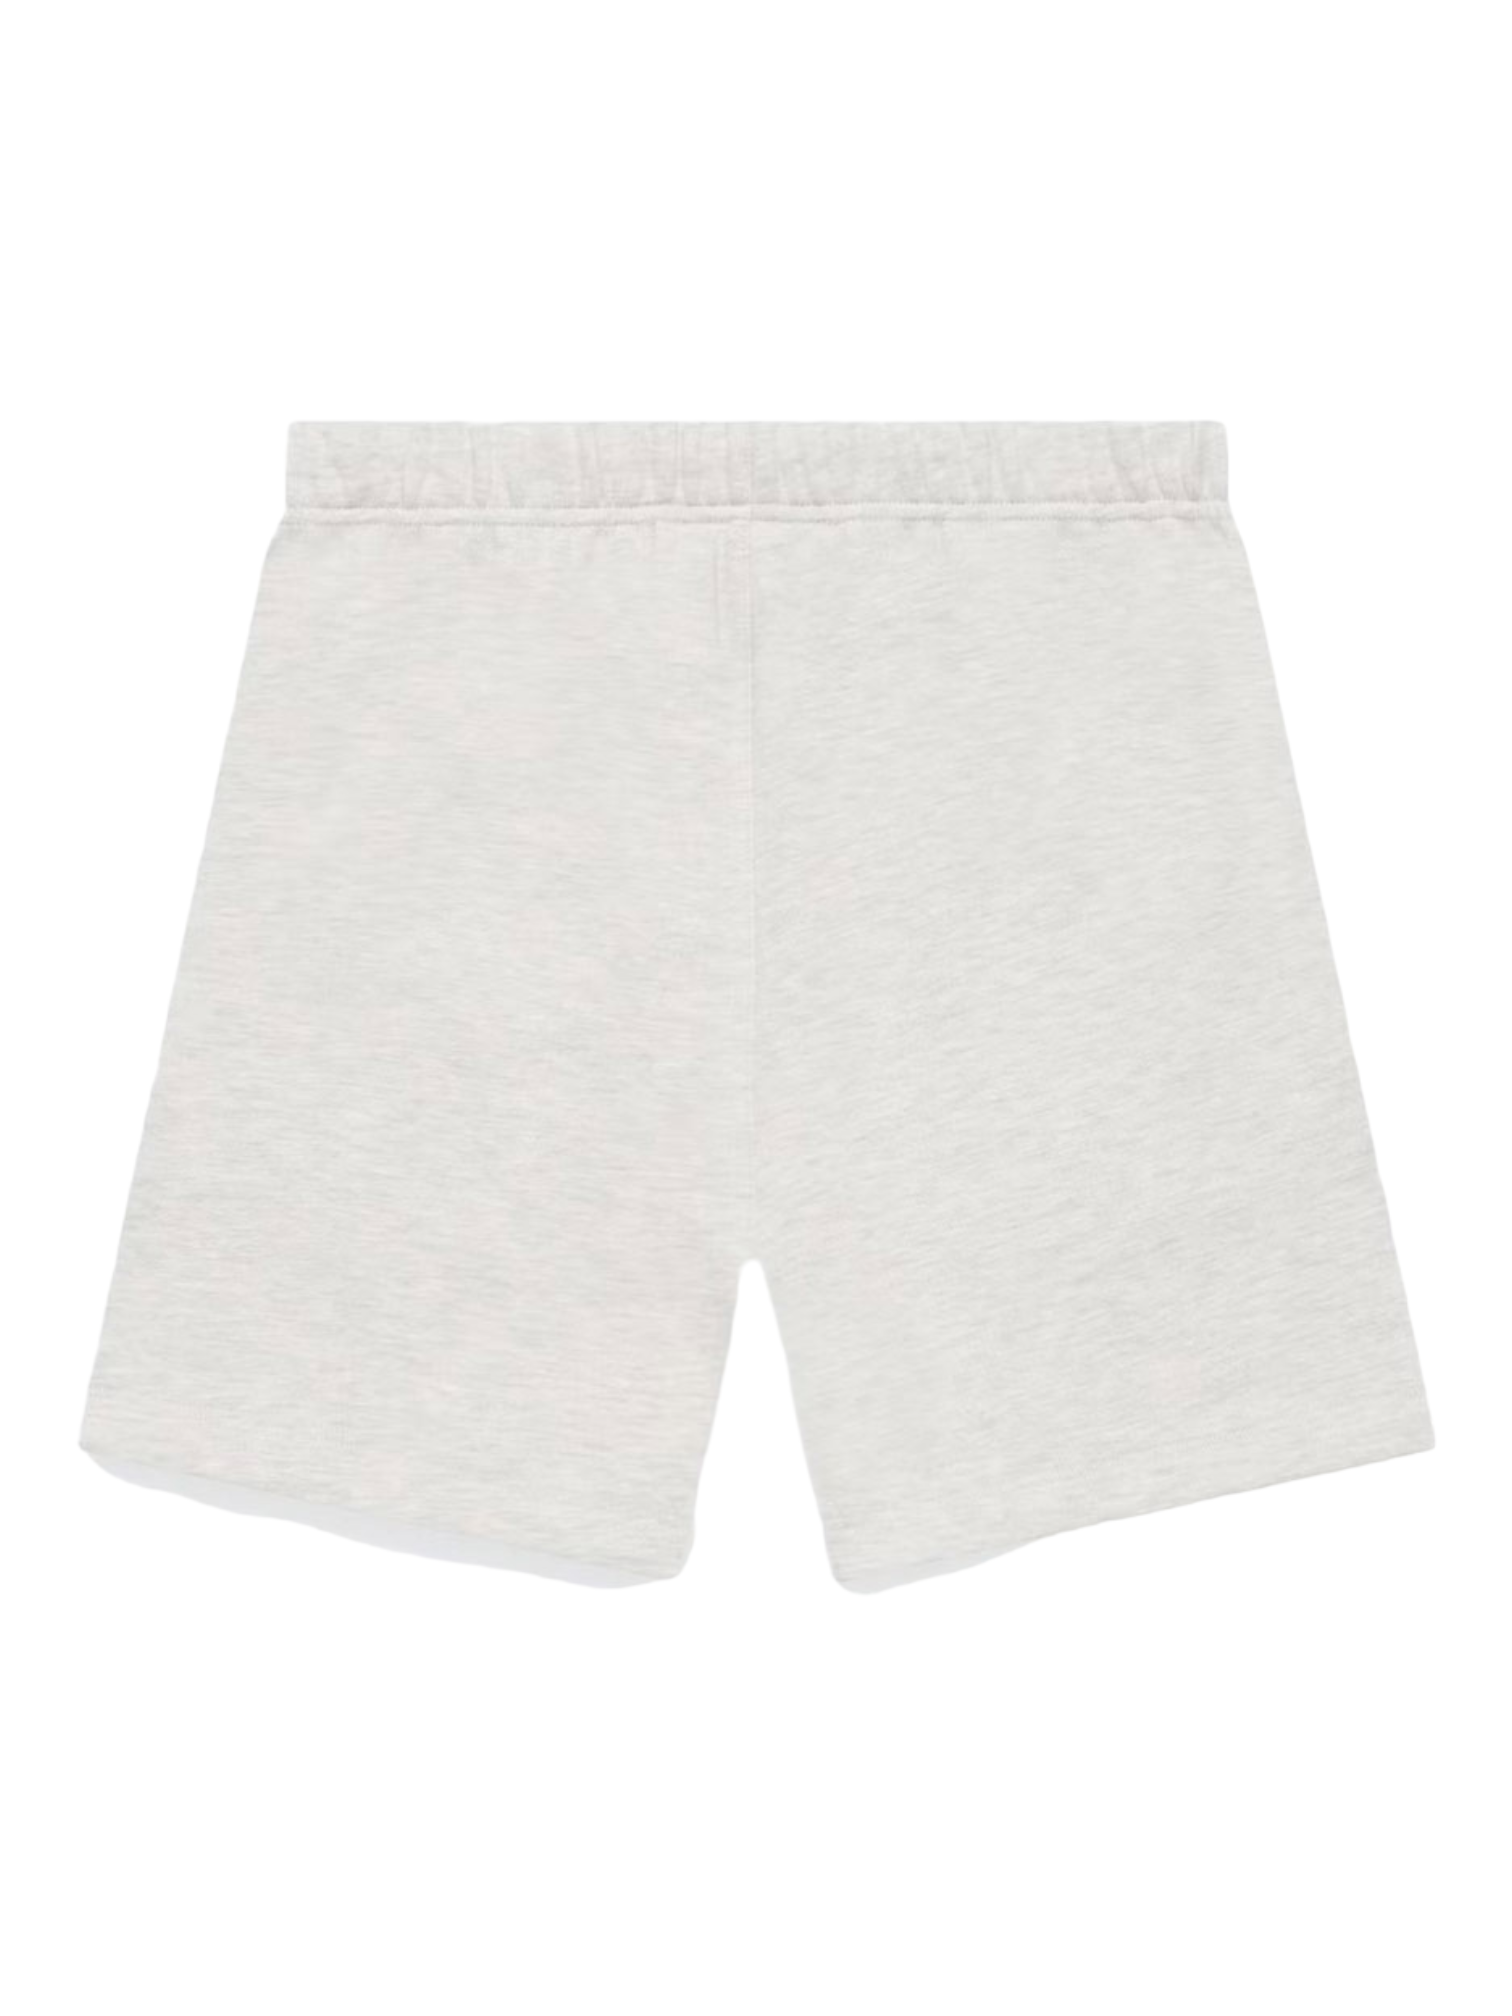 Essentials Fear of God Light Oatmeal Fleece Shorts SS22 — Genuine Design Luxury Consignment Calgary, Alberta, Canada New and Pre-Owned Clothing, Shoes, Accessories.